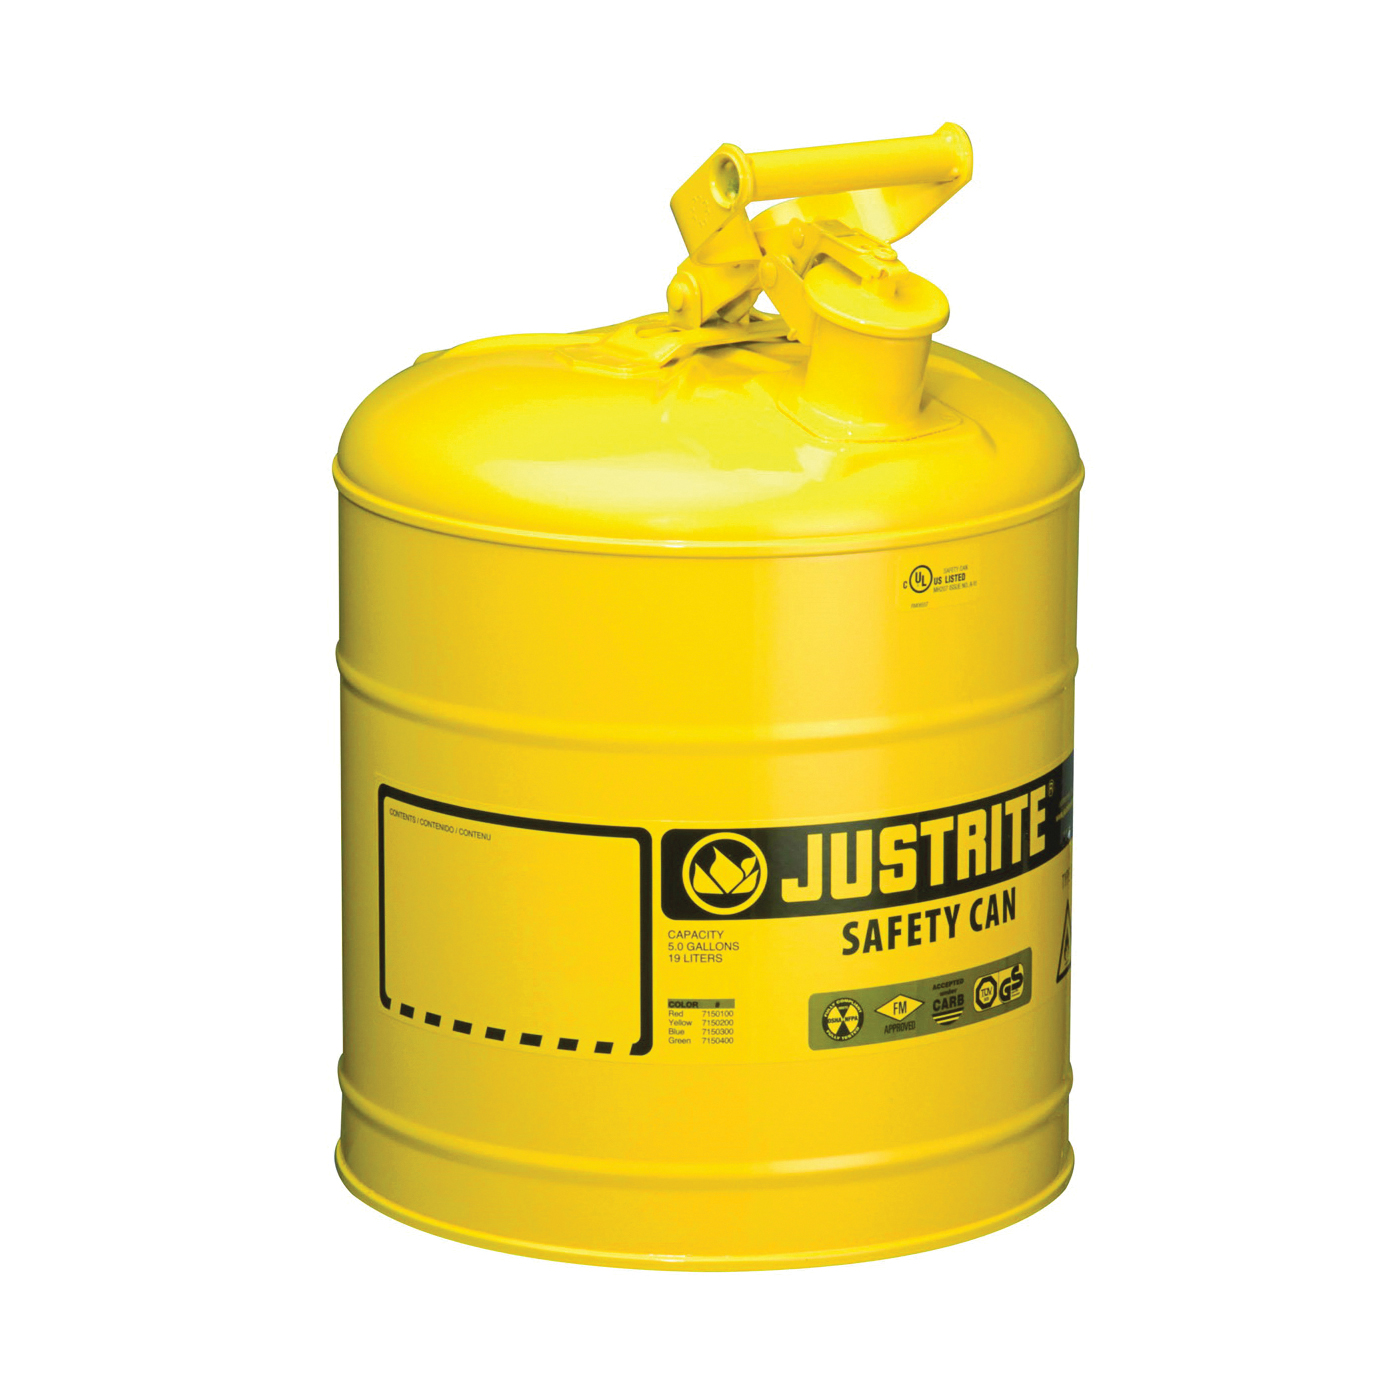 7150200 Safety Can, 5 gal Capacity, Steel, Yellow